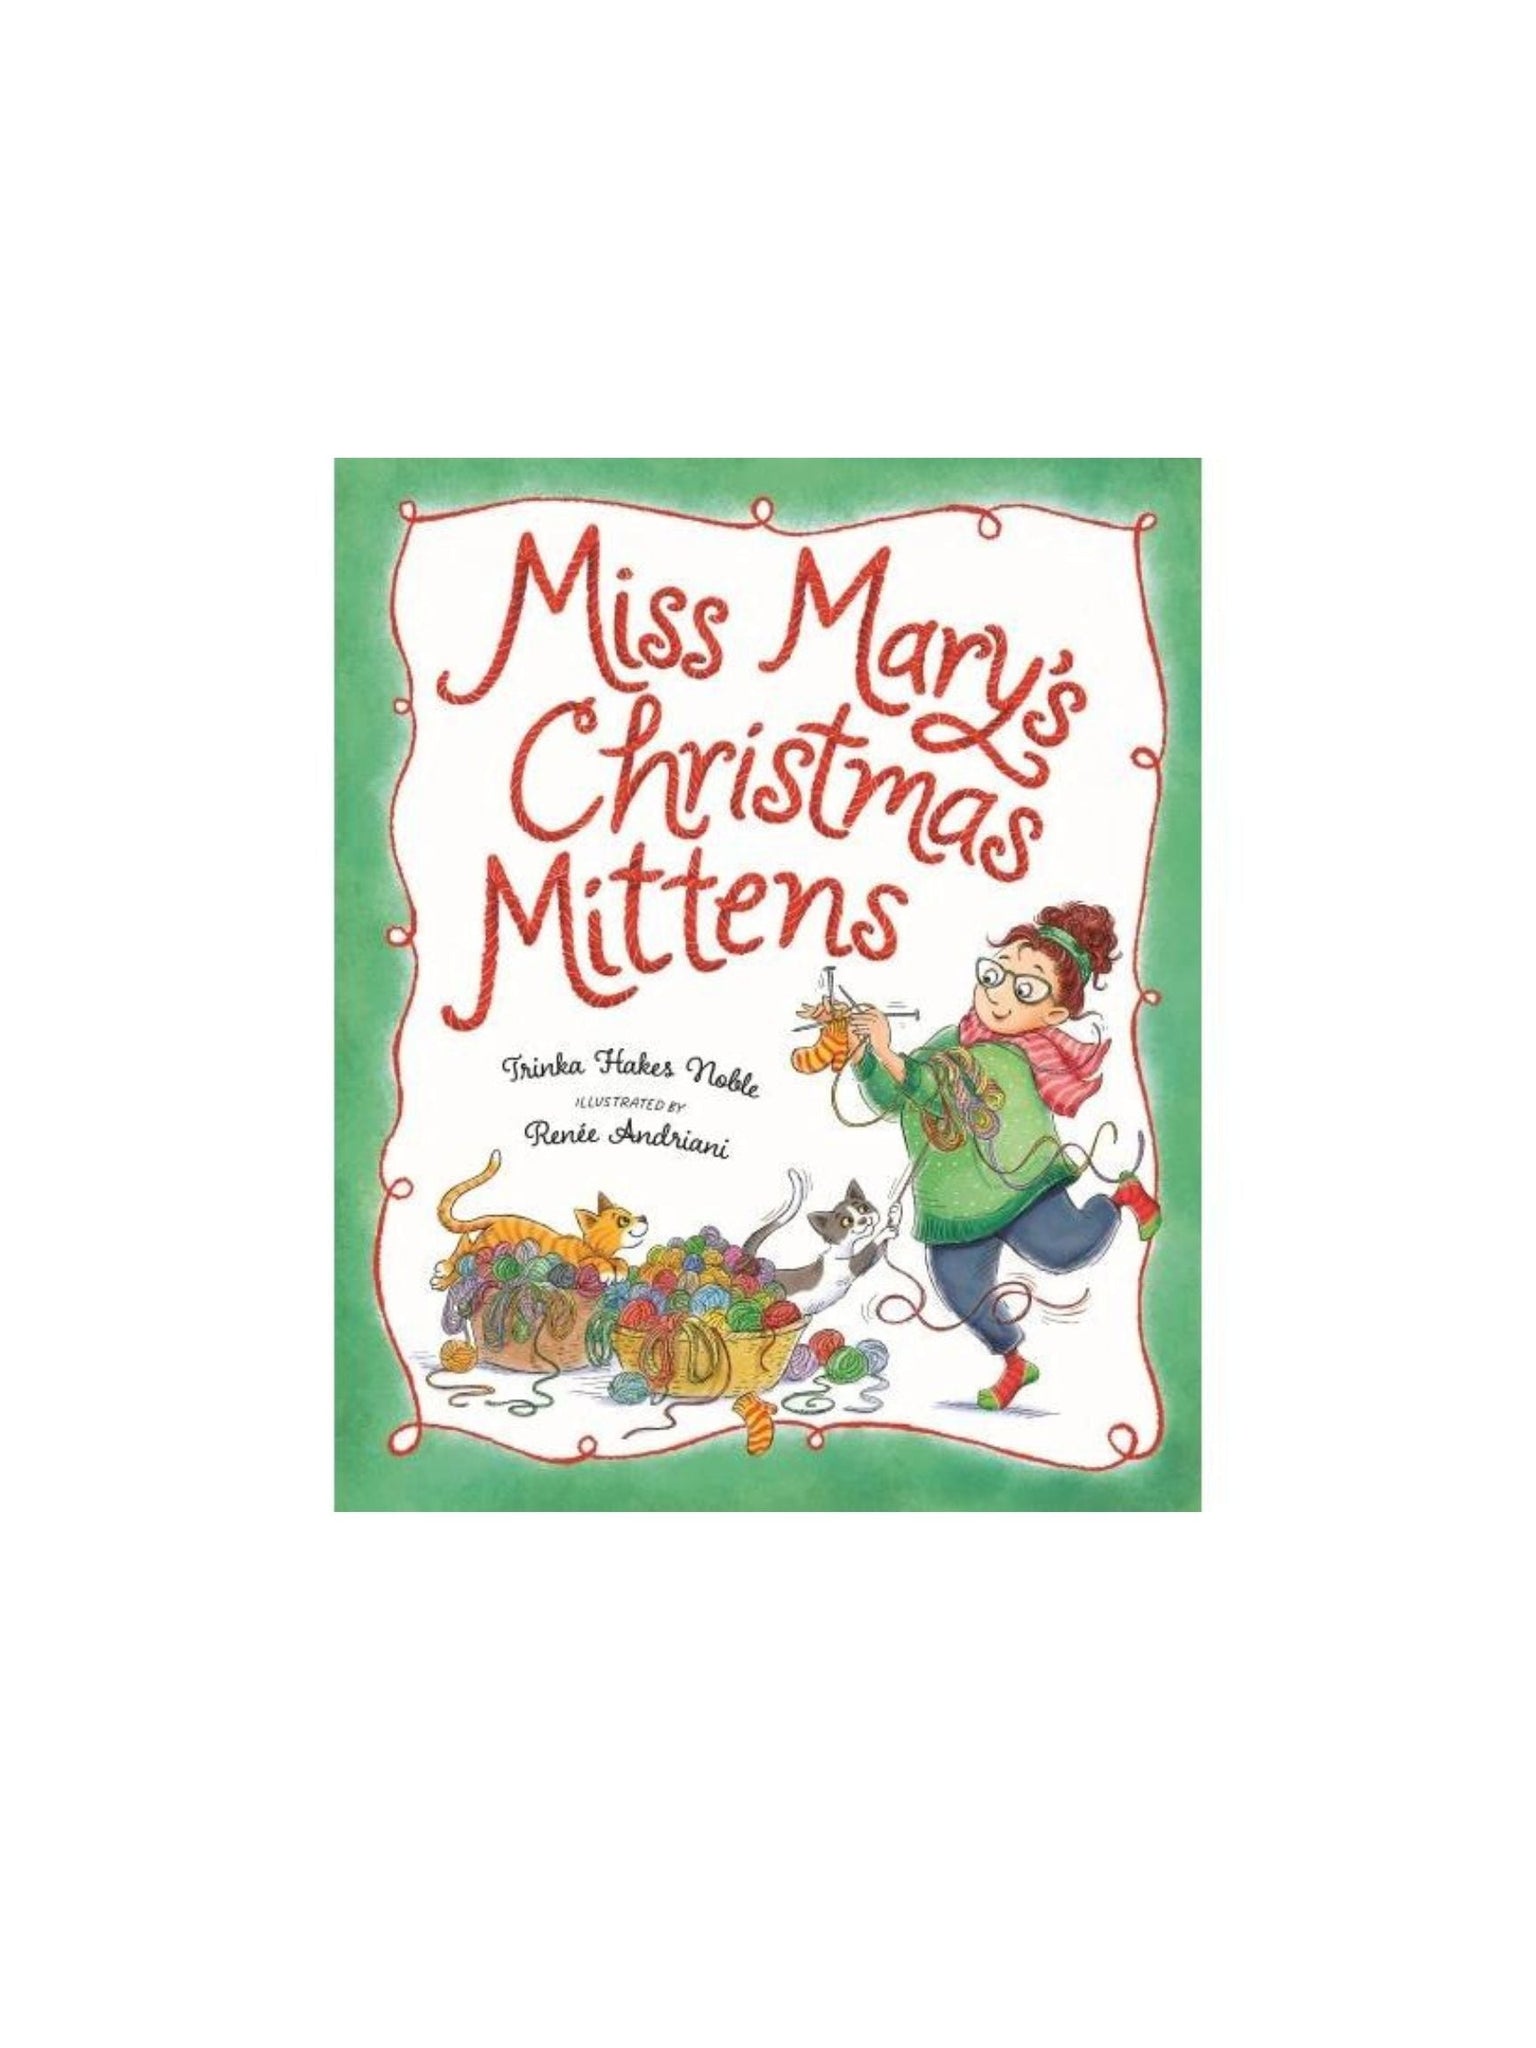 miss mary's christmas mittens book